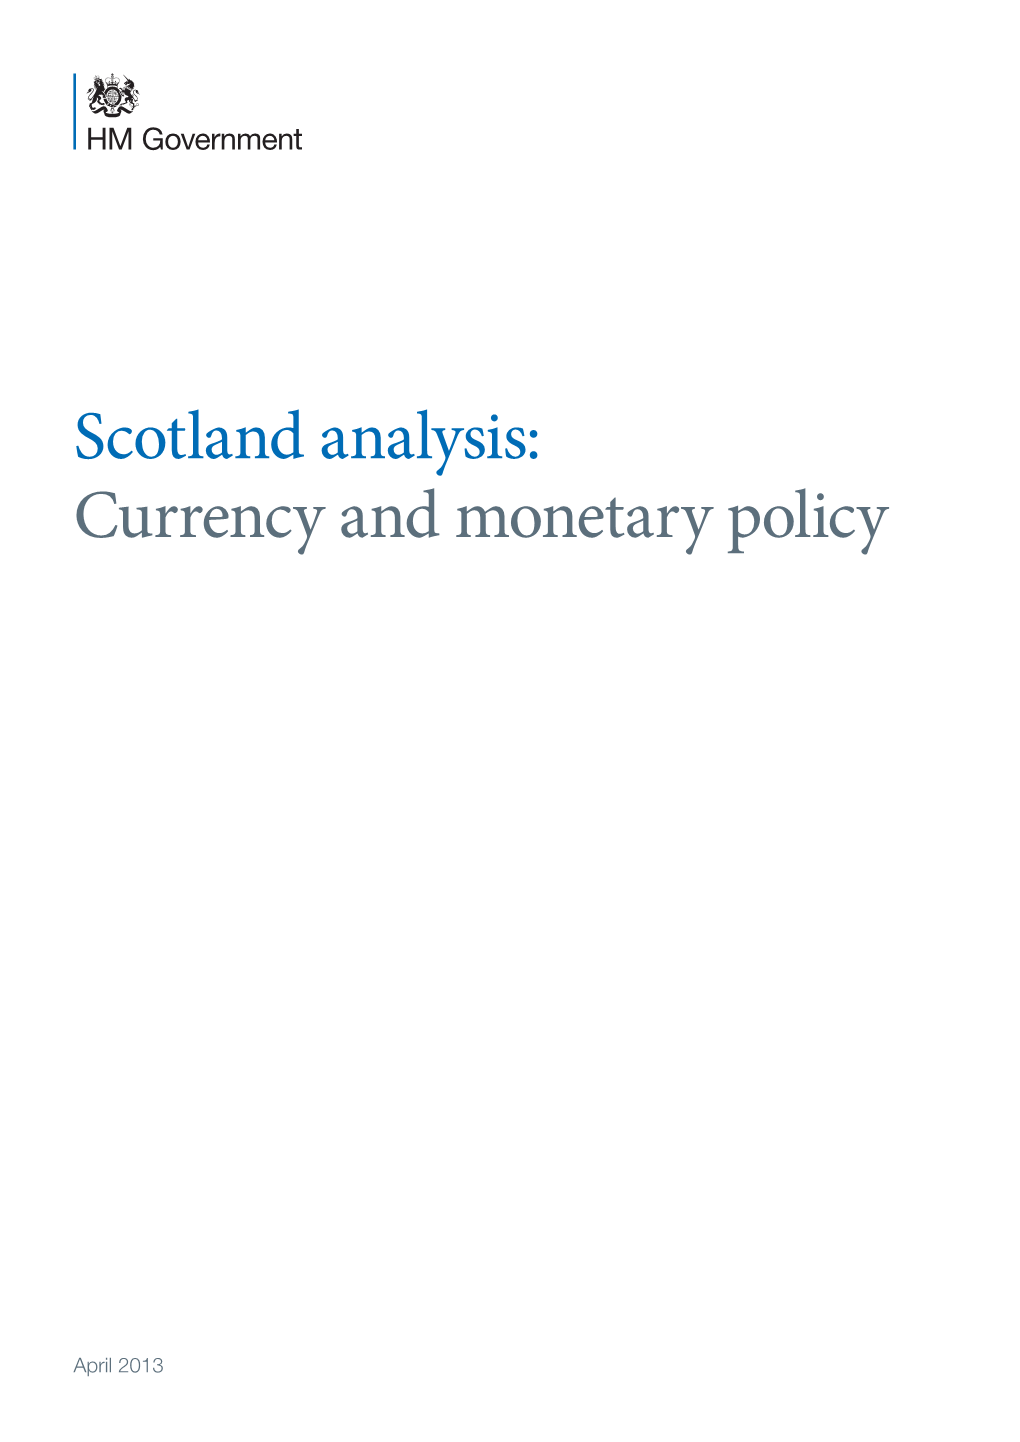 Scotland Analysis: Currency and Monetary Policy